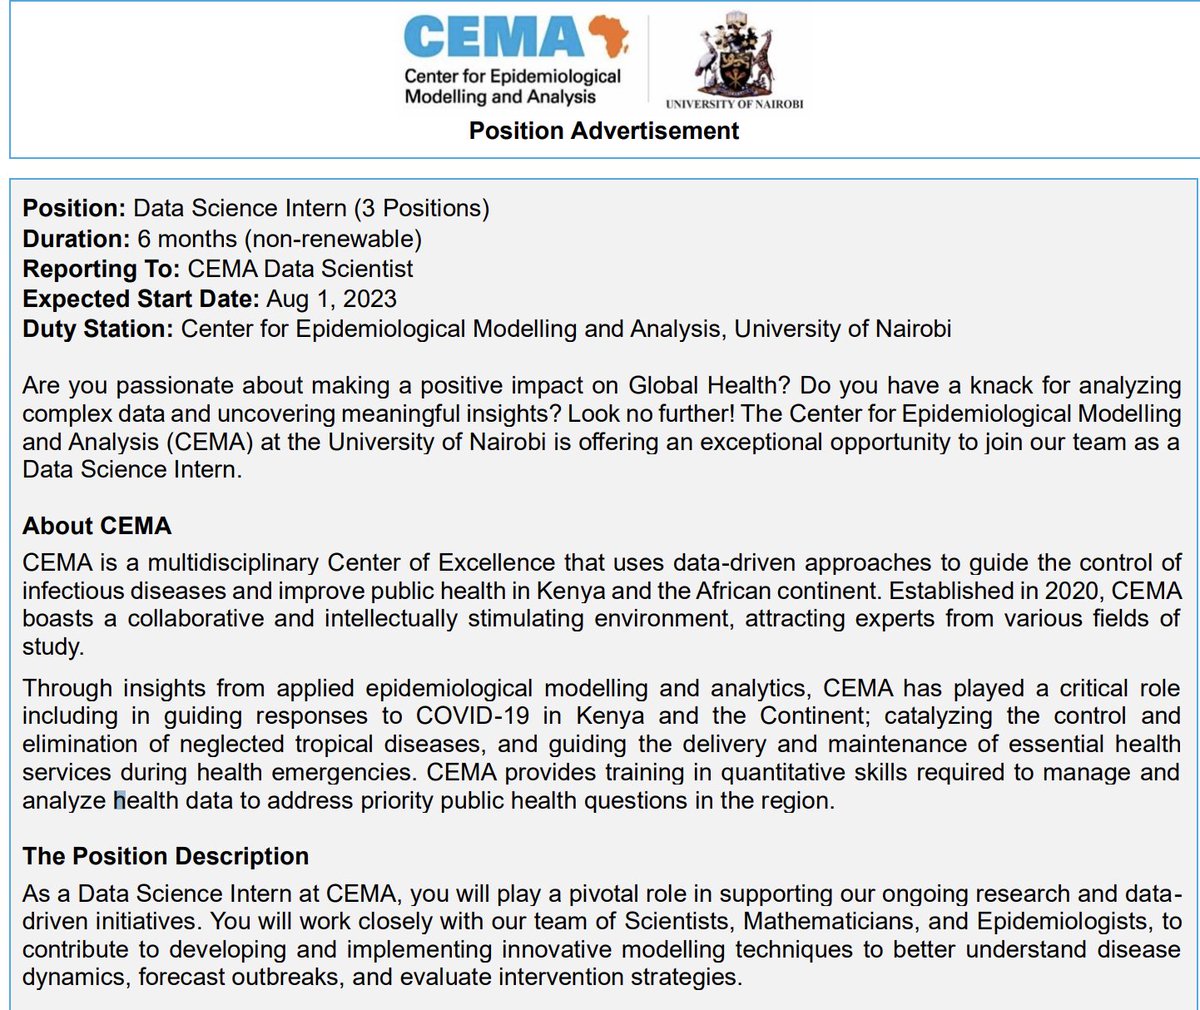 Looking for a Data Science internship? CEMA is looking for you. Please apply. Deadline: 12th July 2023. Link: tinyurl.com/yckta2ze